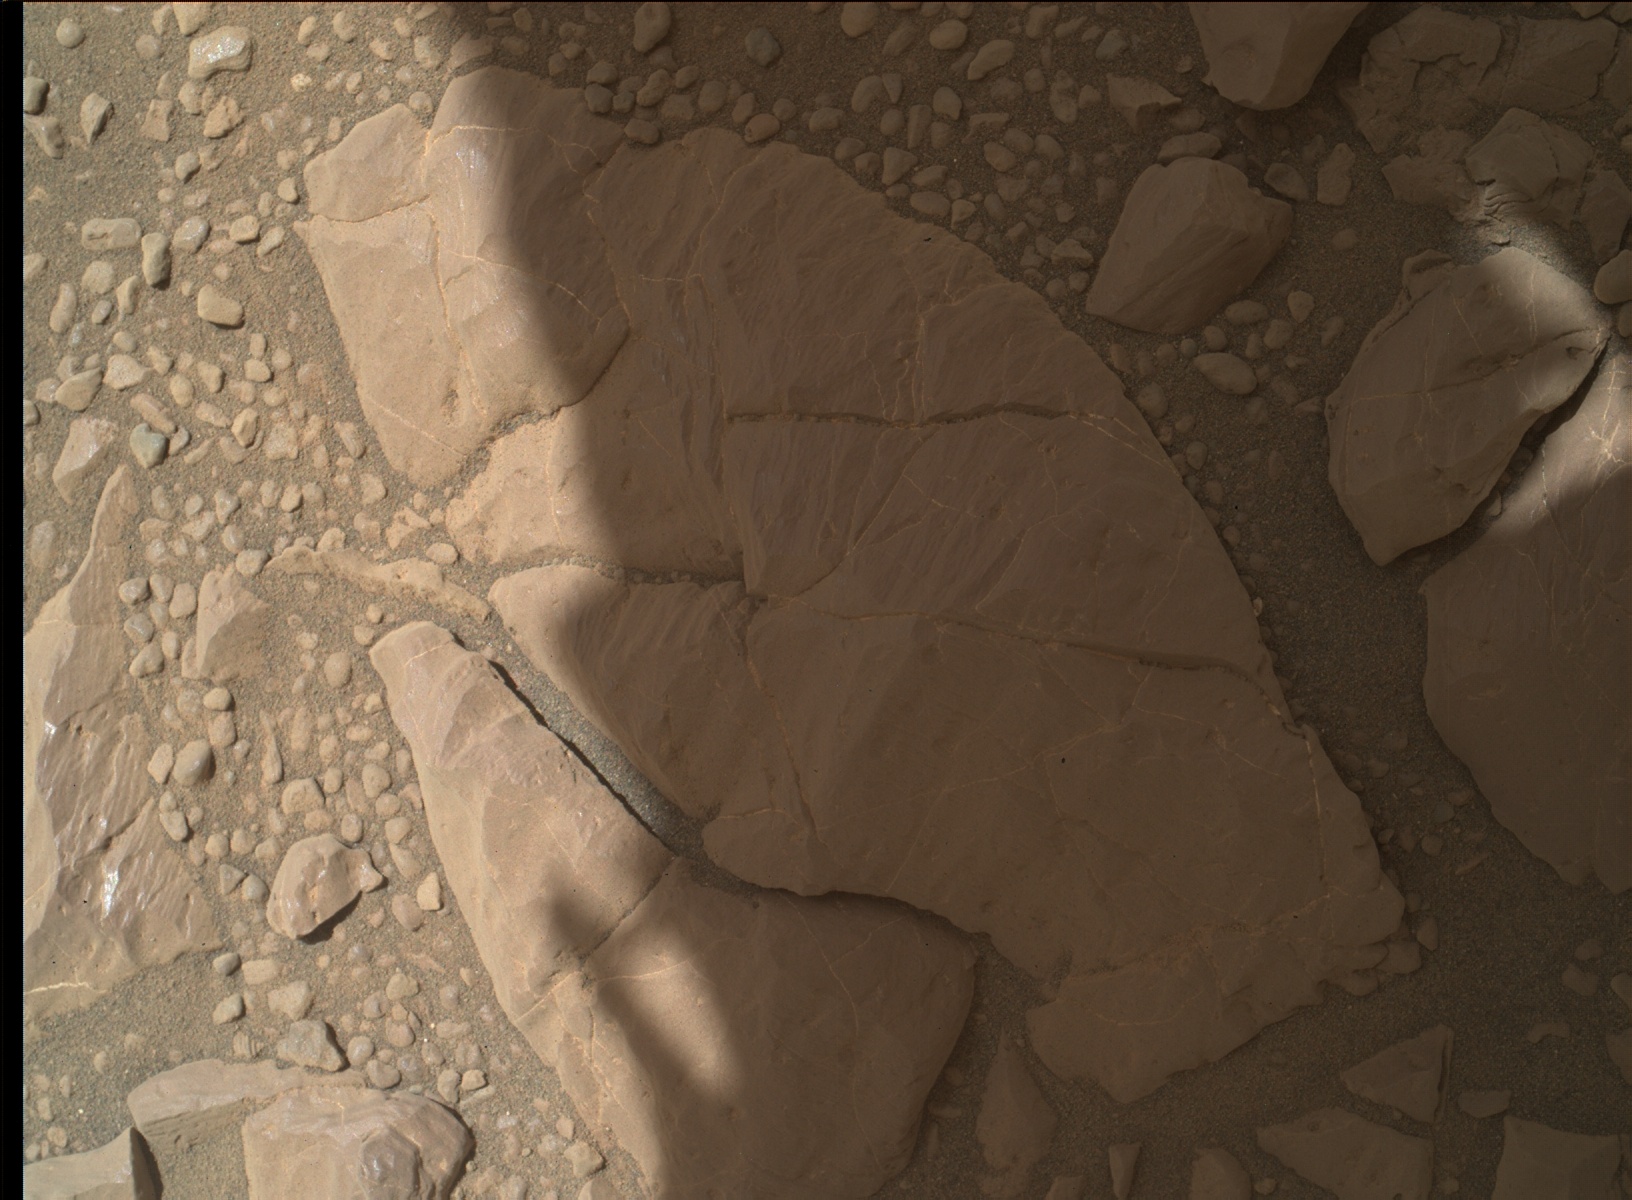 Nasa's Mars rover Curiosity acquired this image using its Mars Hand Lens Imager (MAHLI) on Sol 1954